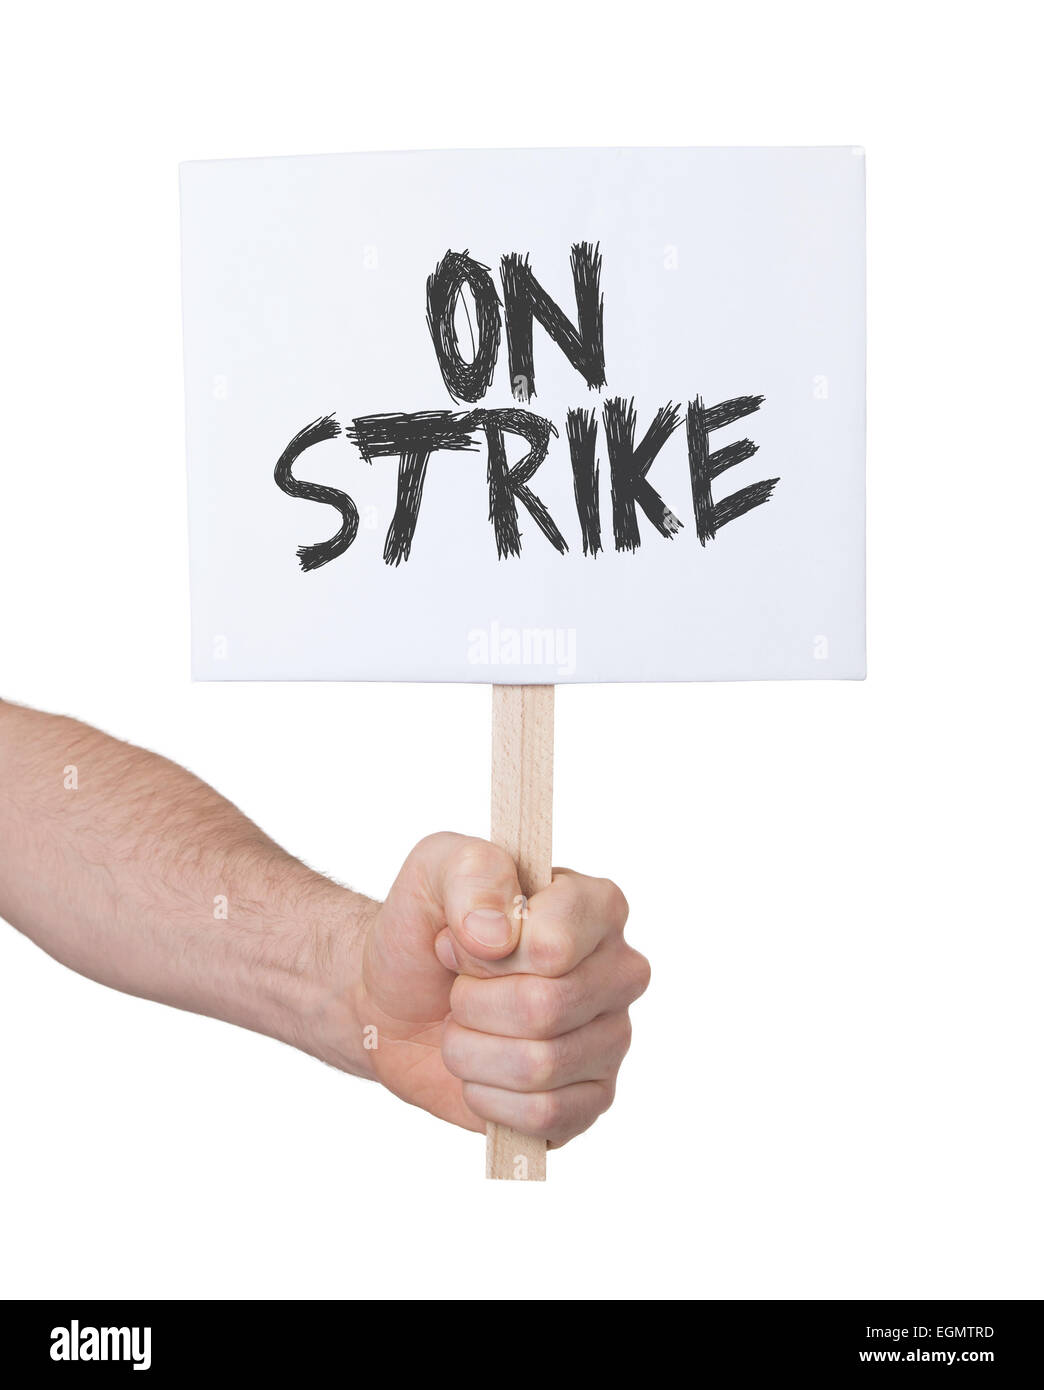 Hand holding sign, isolated on white - On strike Stock Photo